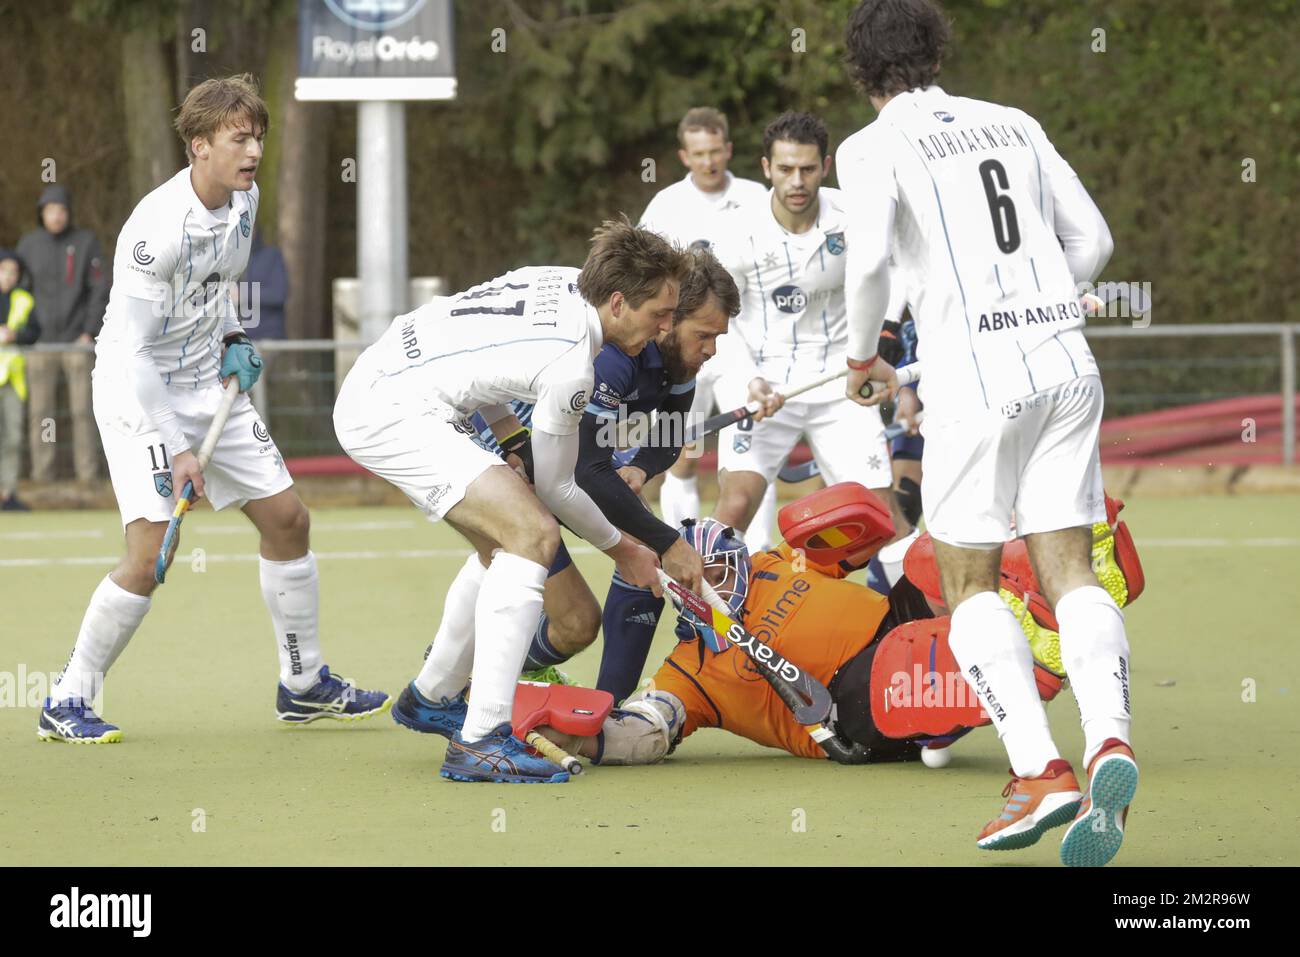 Braxgata's Alexis Robinet pictured in action during a hockey game between  Braxgata Hockey Club and KHC Dragons, on day 13 of the 'Audi league' hockey  competition, Sunday 17 March 2019 in Boom.